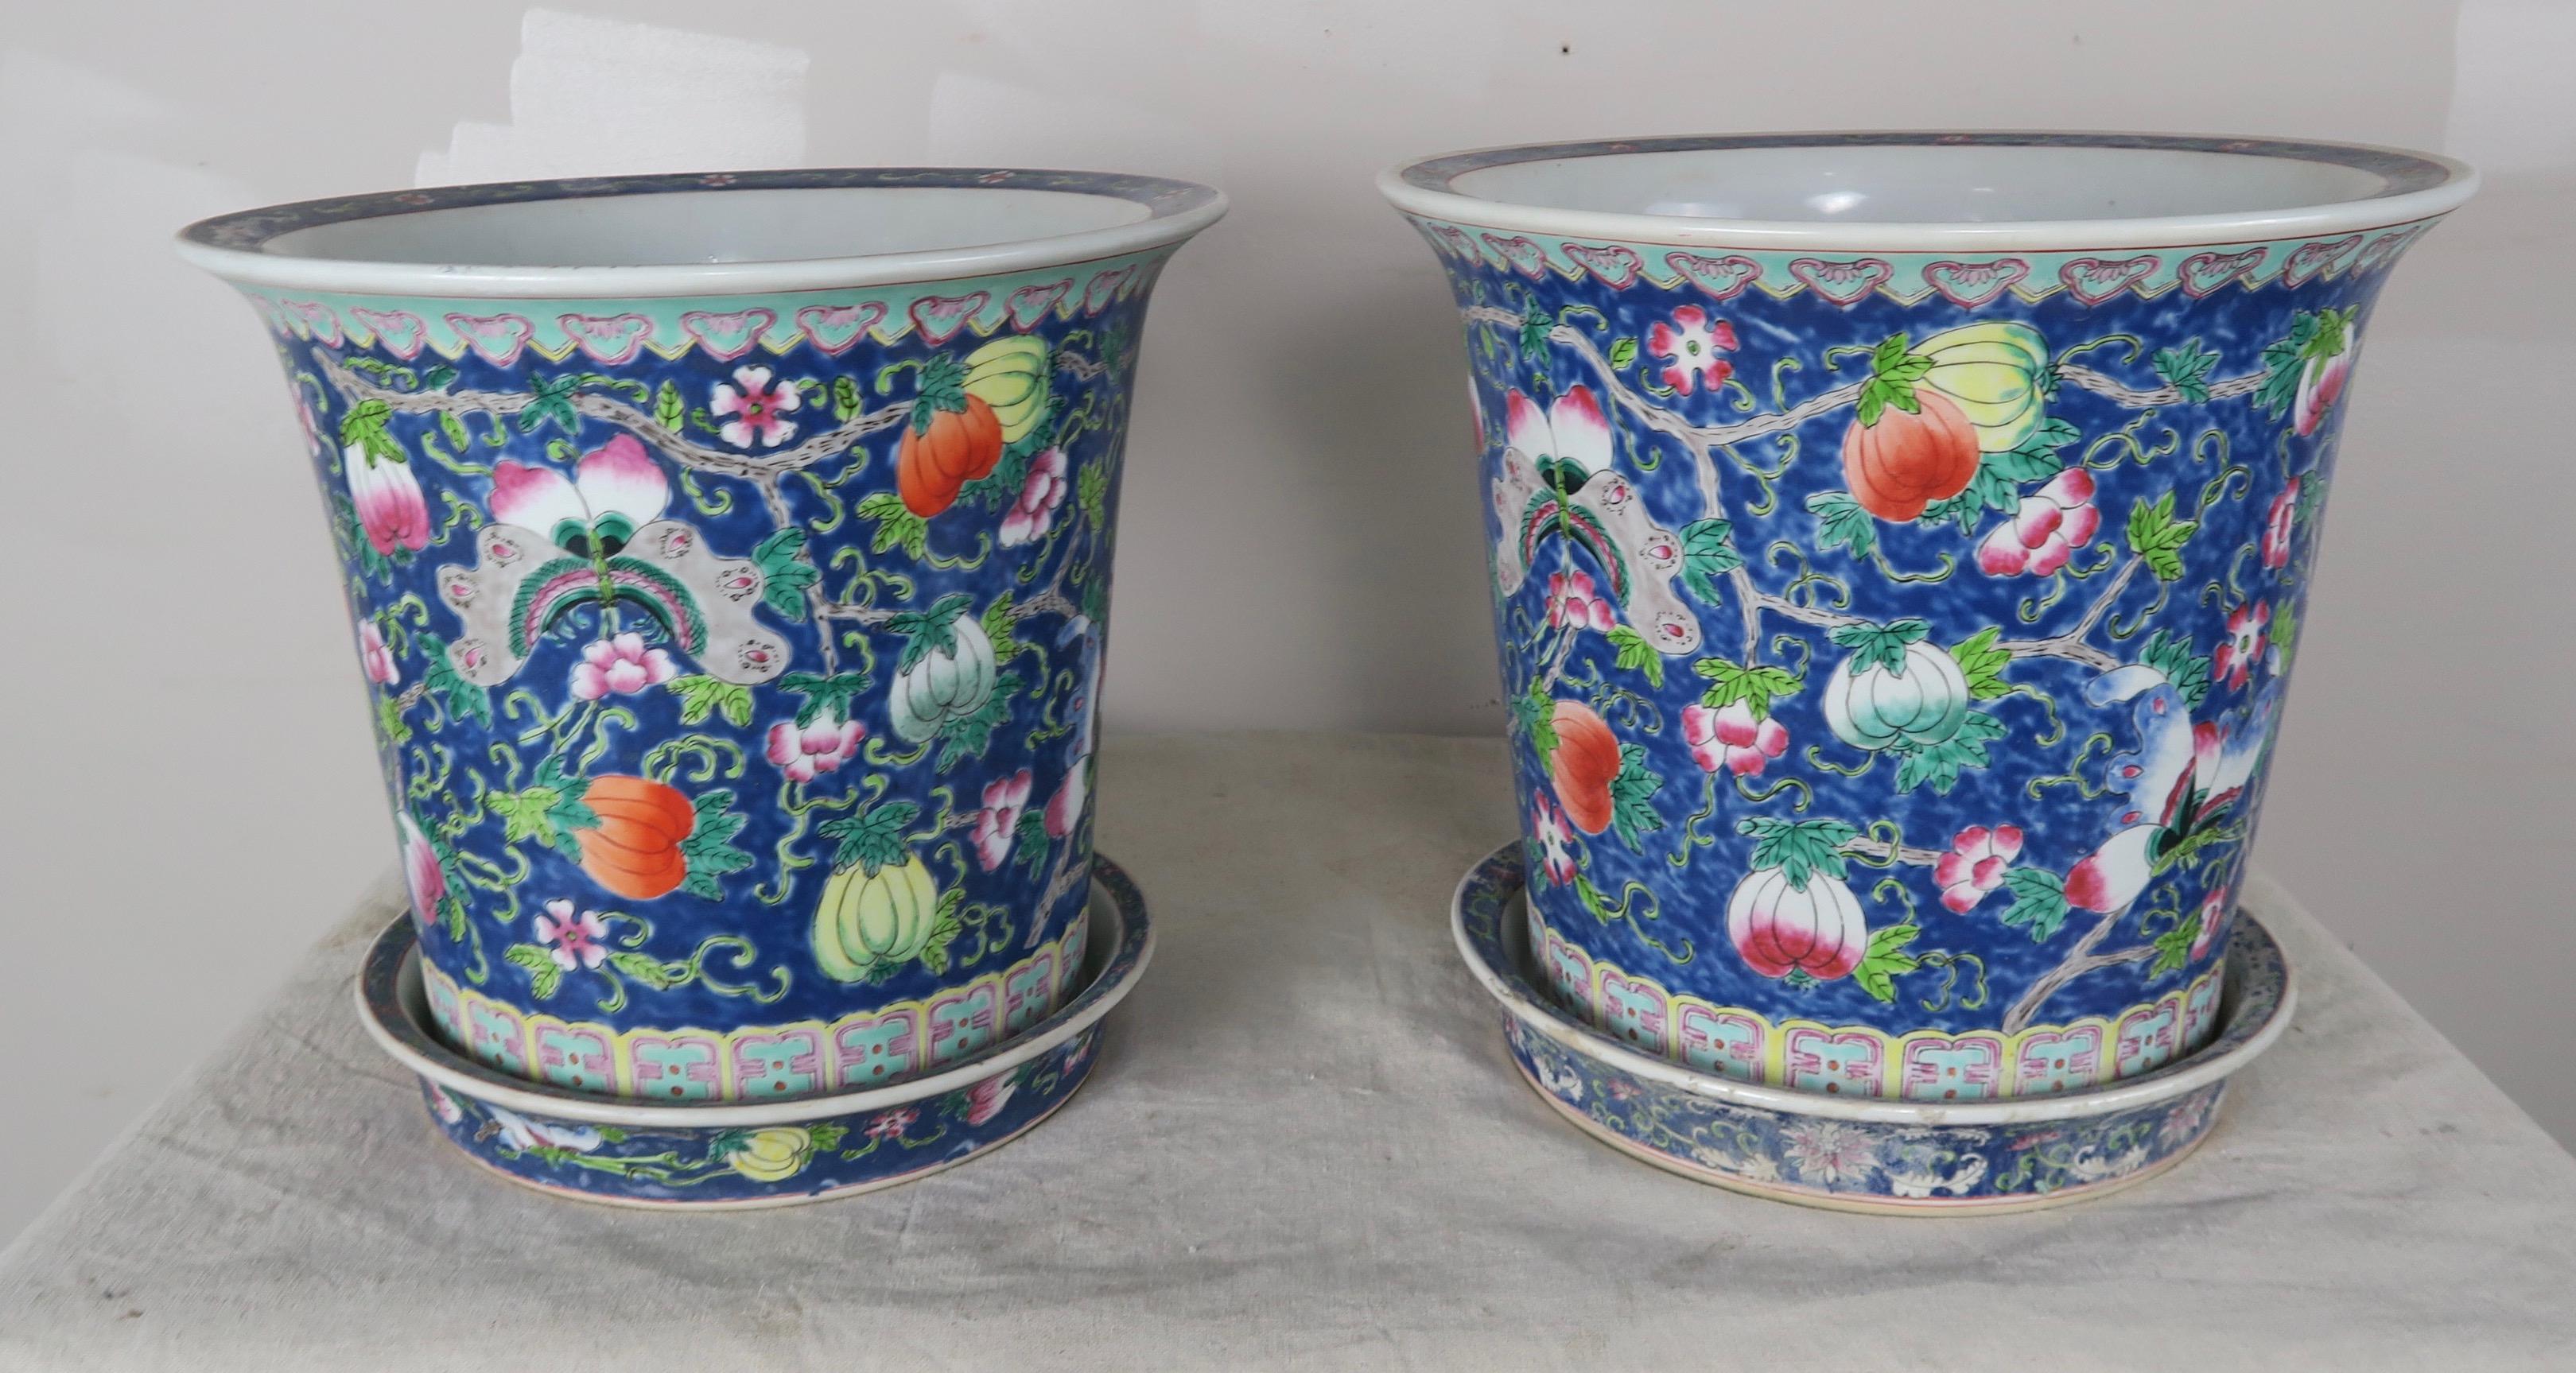 Glazed Pair of Hand Painted Ceramic Pots